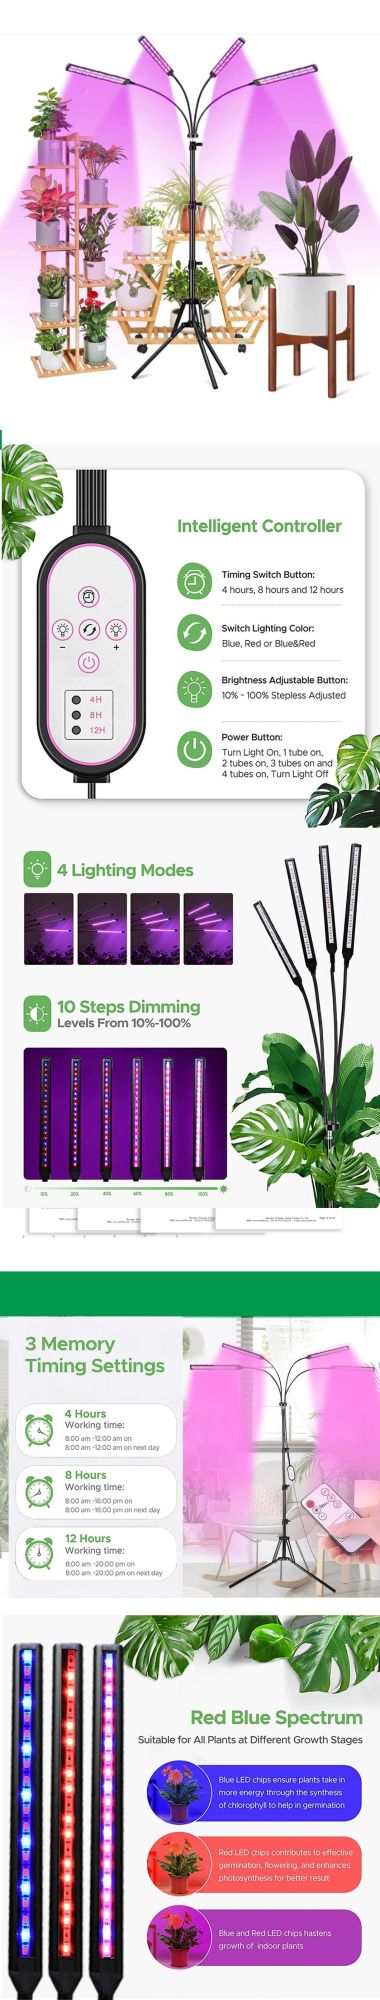 Remoted LED Grow Light Full Spectrum Grow Lamp with Intelligent Controller for Greenhouse